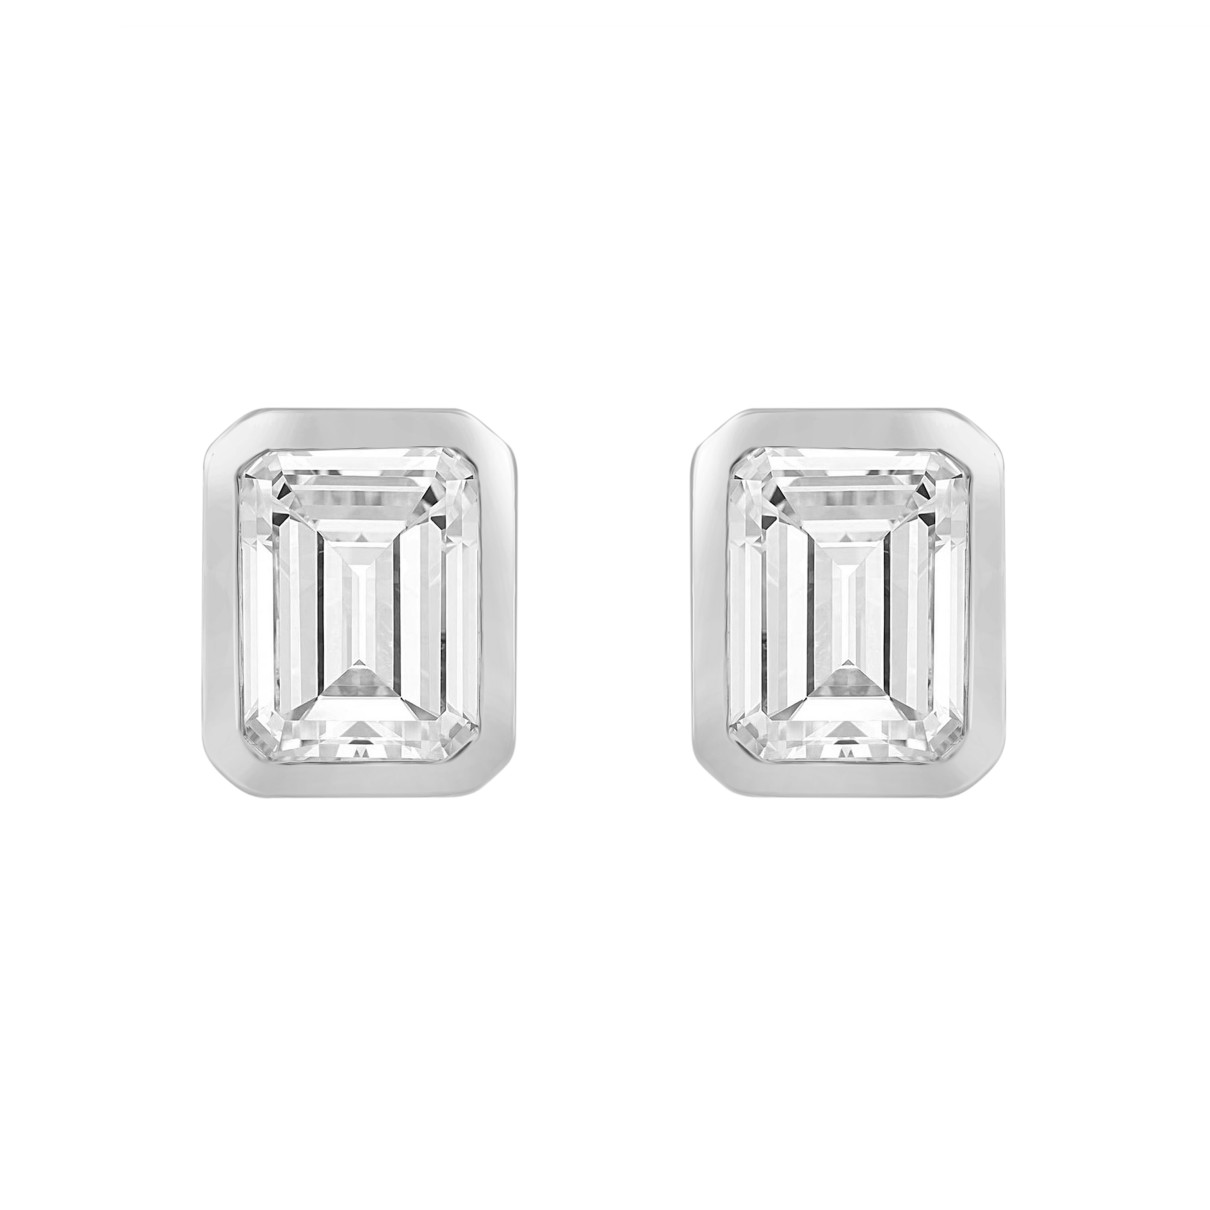 LADIES SOLITAIRE EARRINGS 4.00CT 14K WHITE GOLD...